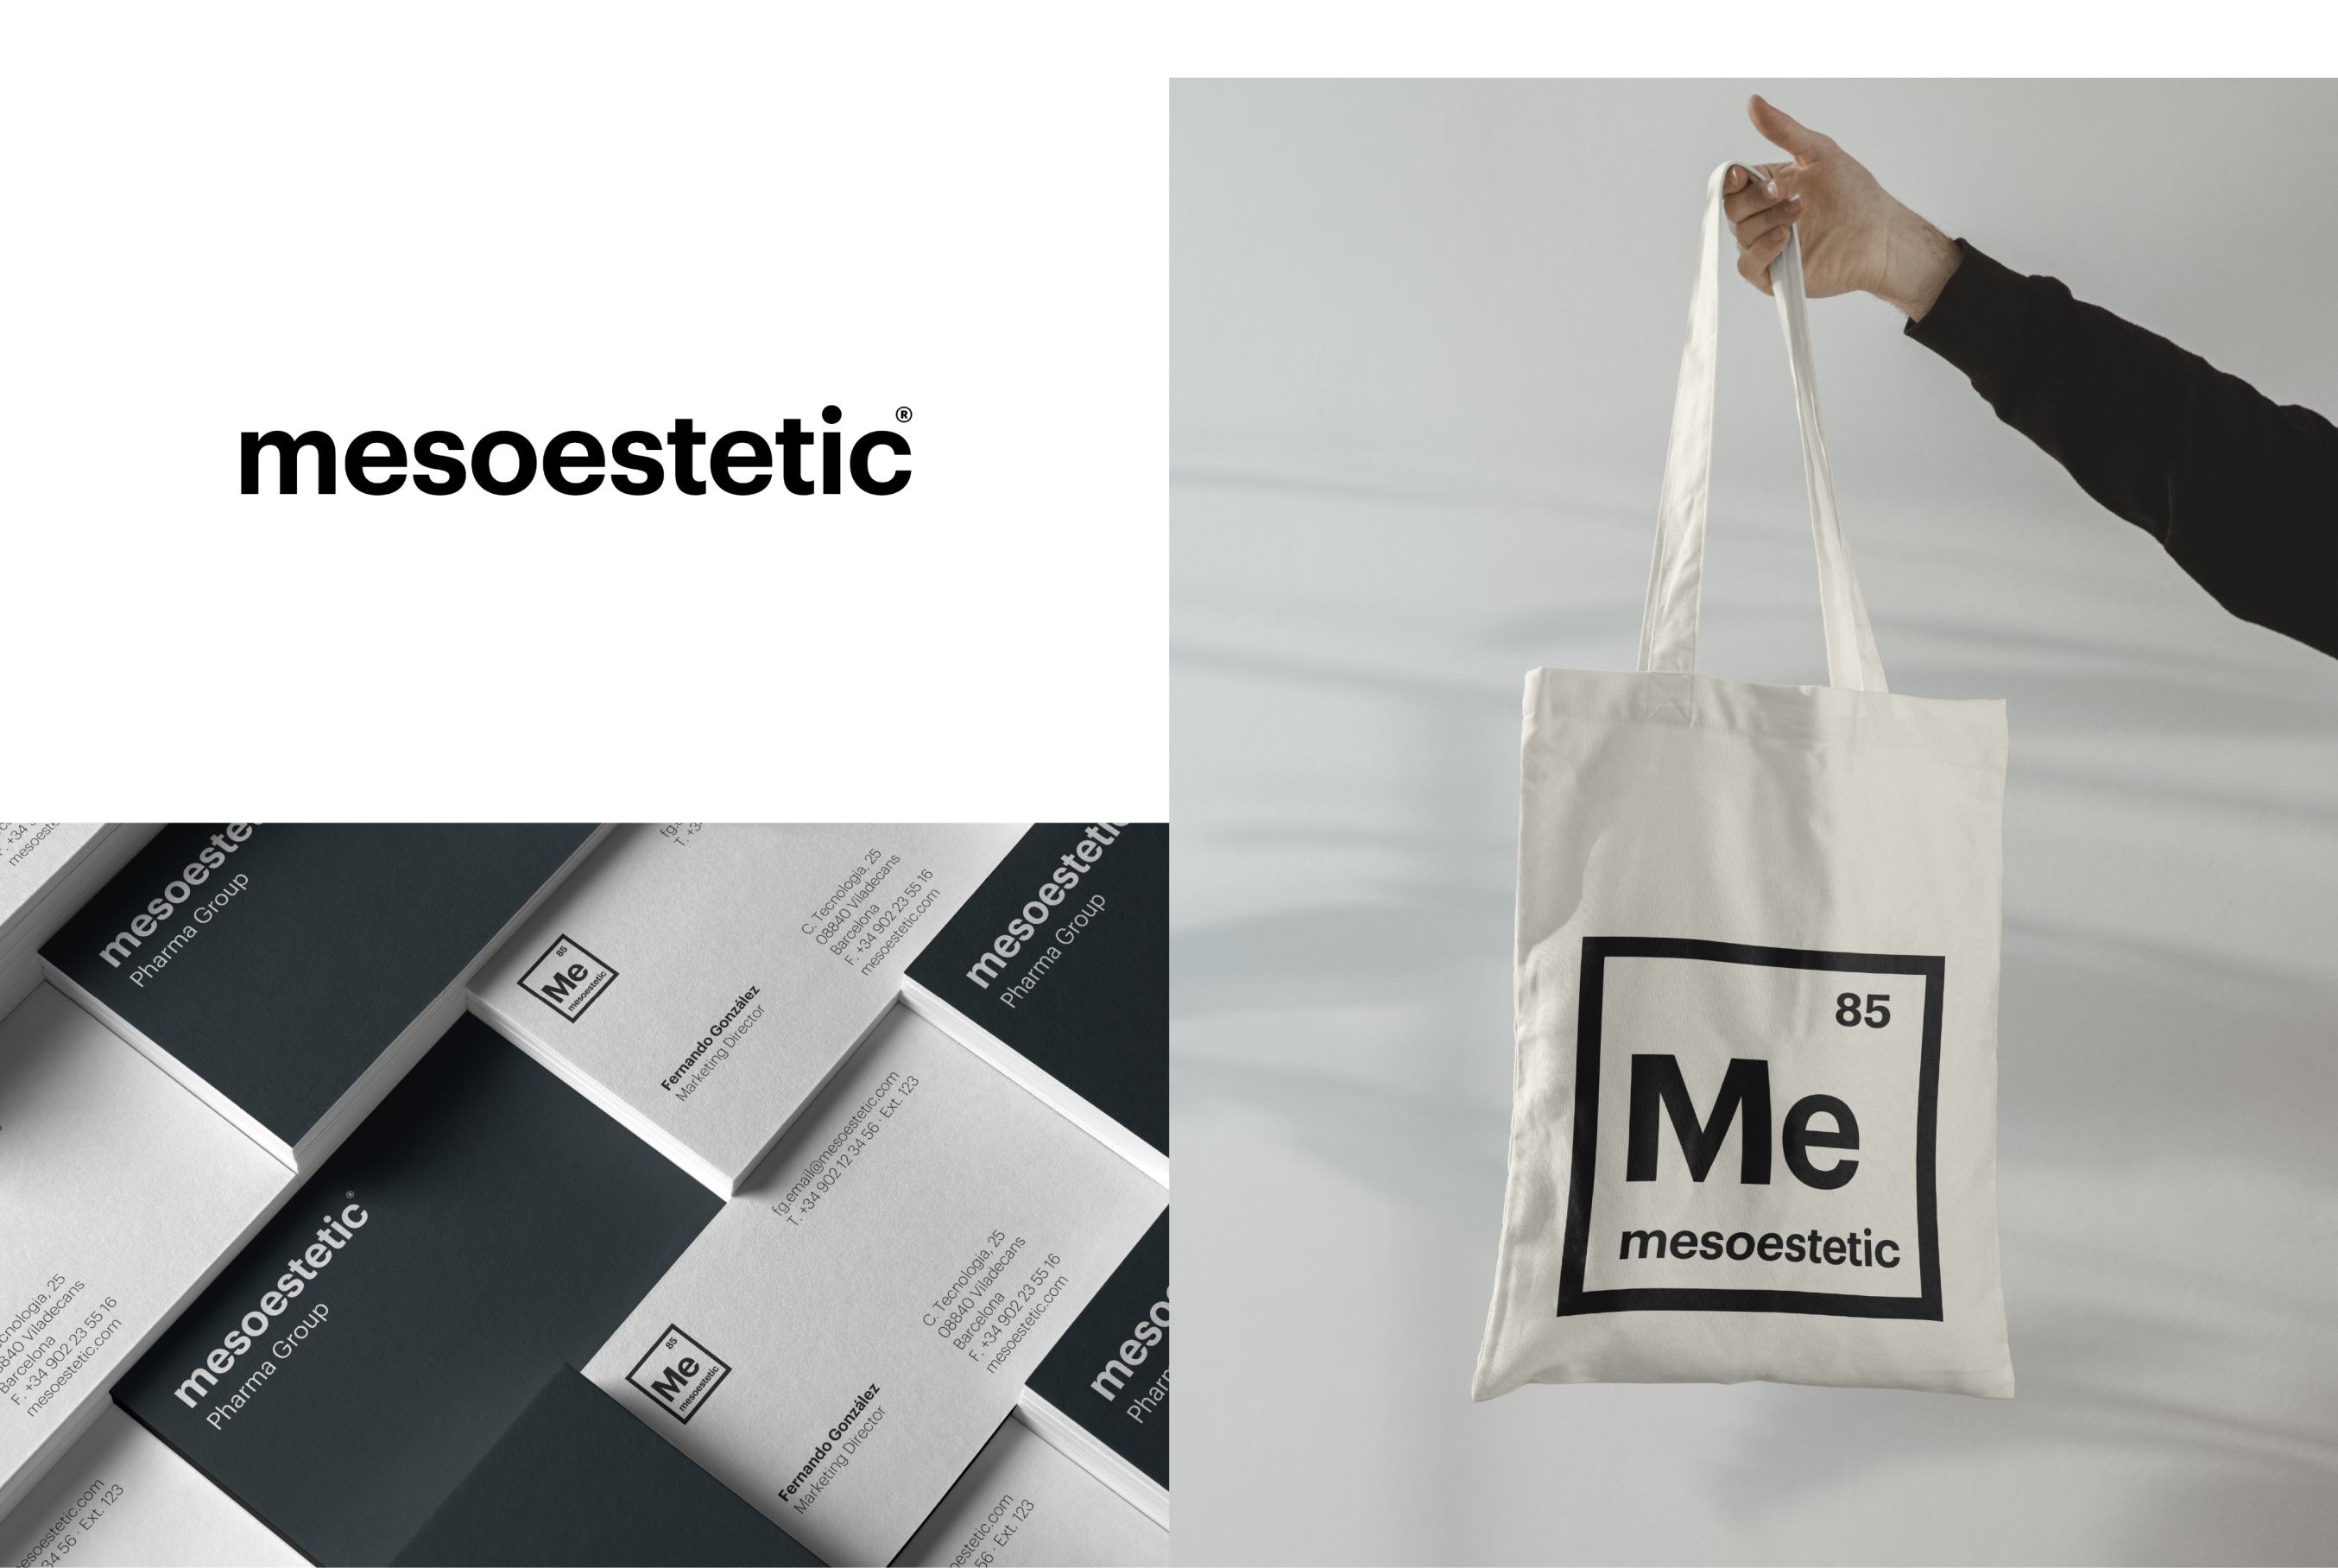 Mesoestetic was founded in 1980 in the back room of a pharmacy in Barcelona, with the aim of creating advanced cosmetic solutions. Today it has become a world reference in the medical aesthetic sector, with a presence in more than 90 countries.
